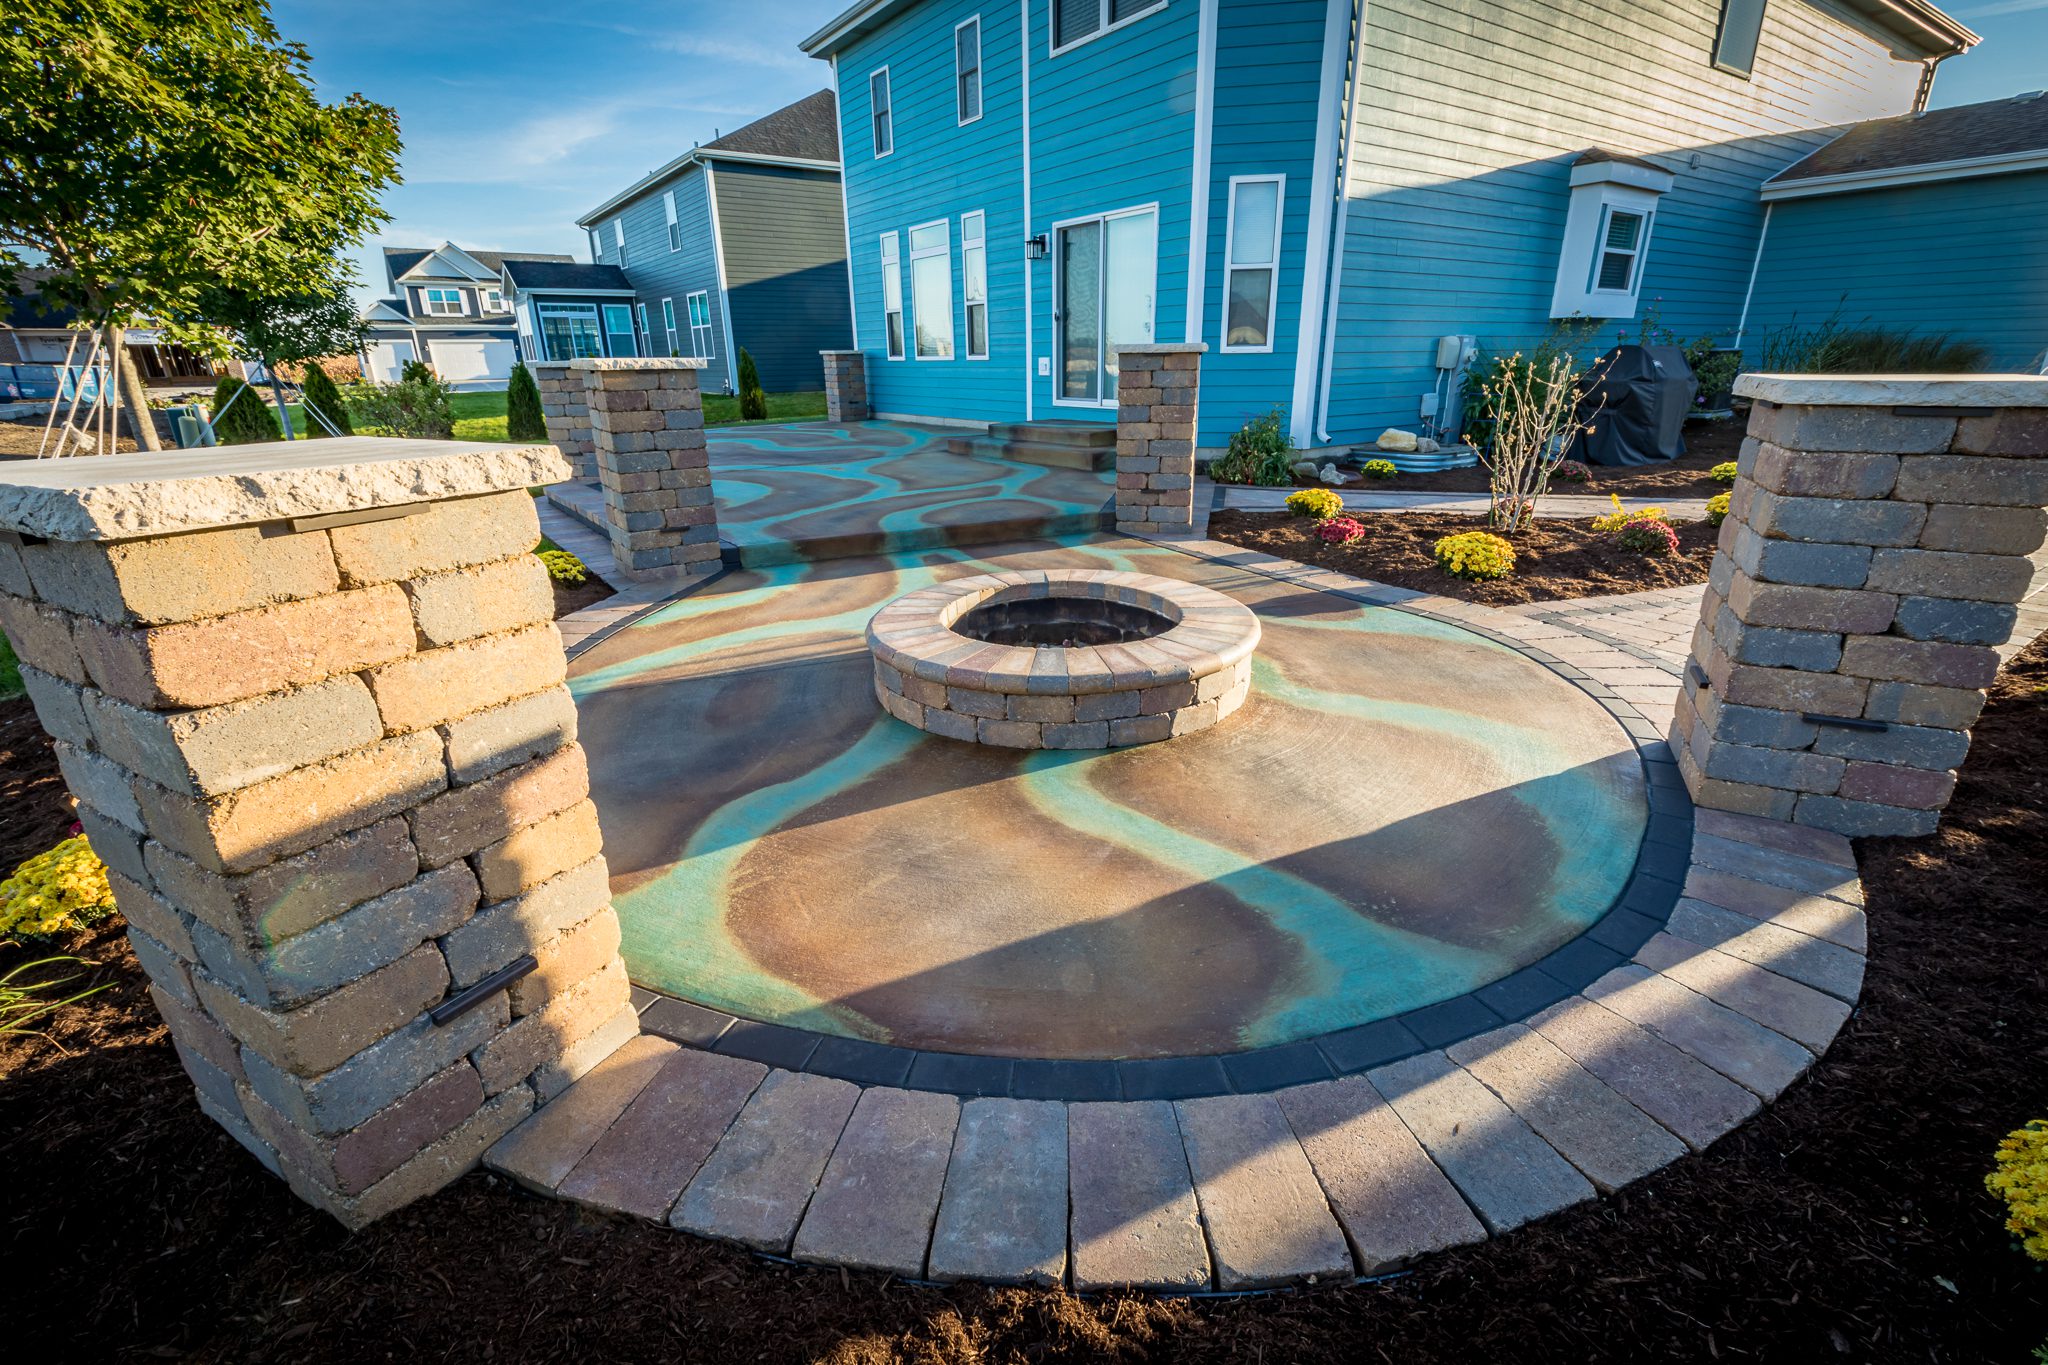 The finished stained and sealed patio showcases the beautiful multi-colored effect created by using Black and Malayan Buff acid stains to add depth and contrast to the Seagrass streaks.